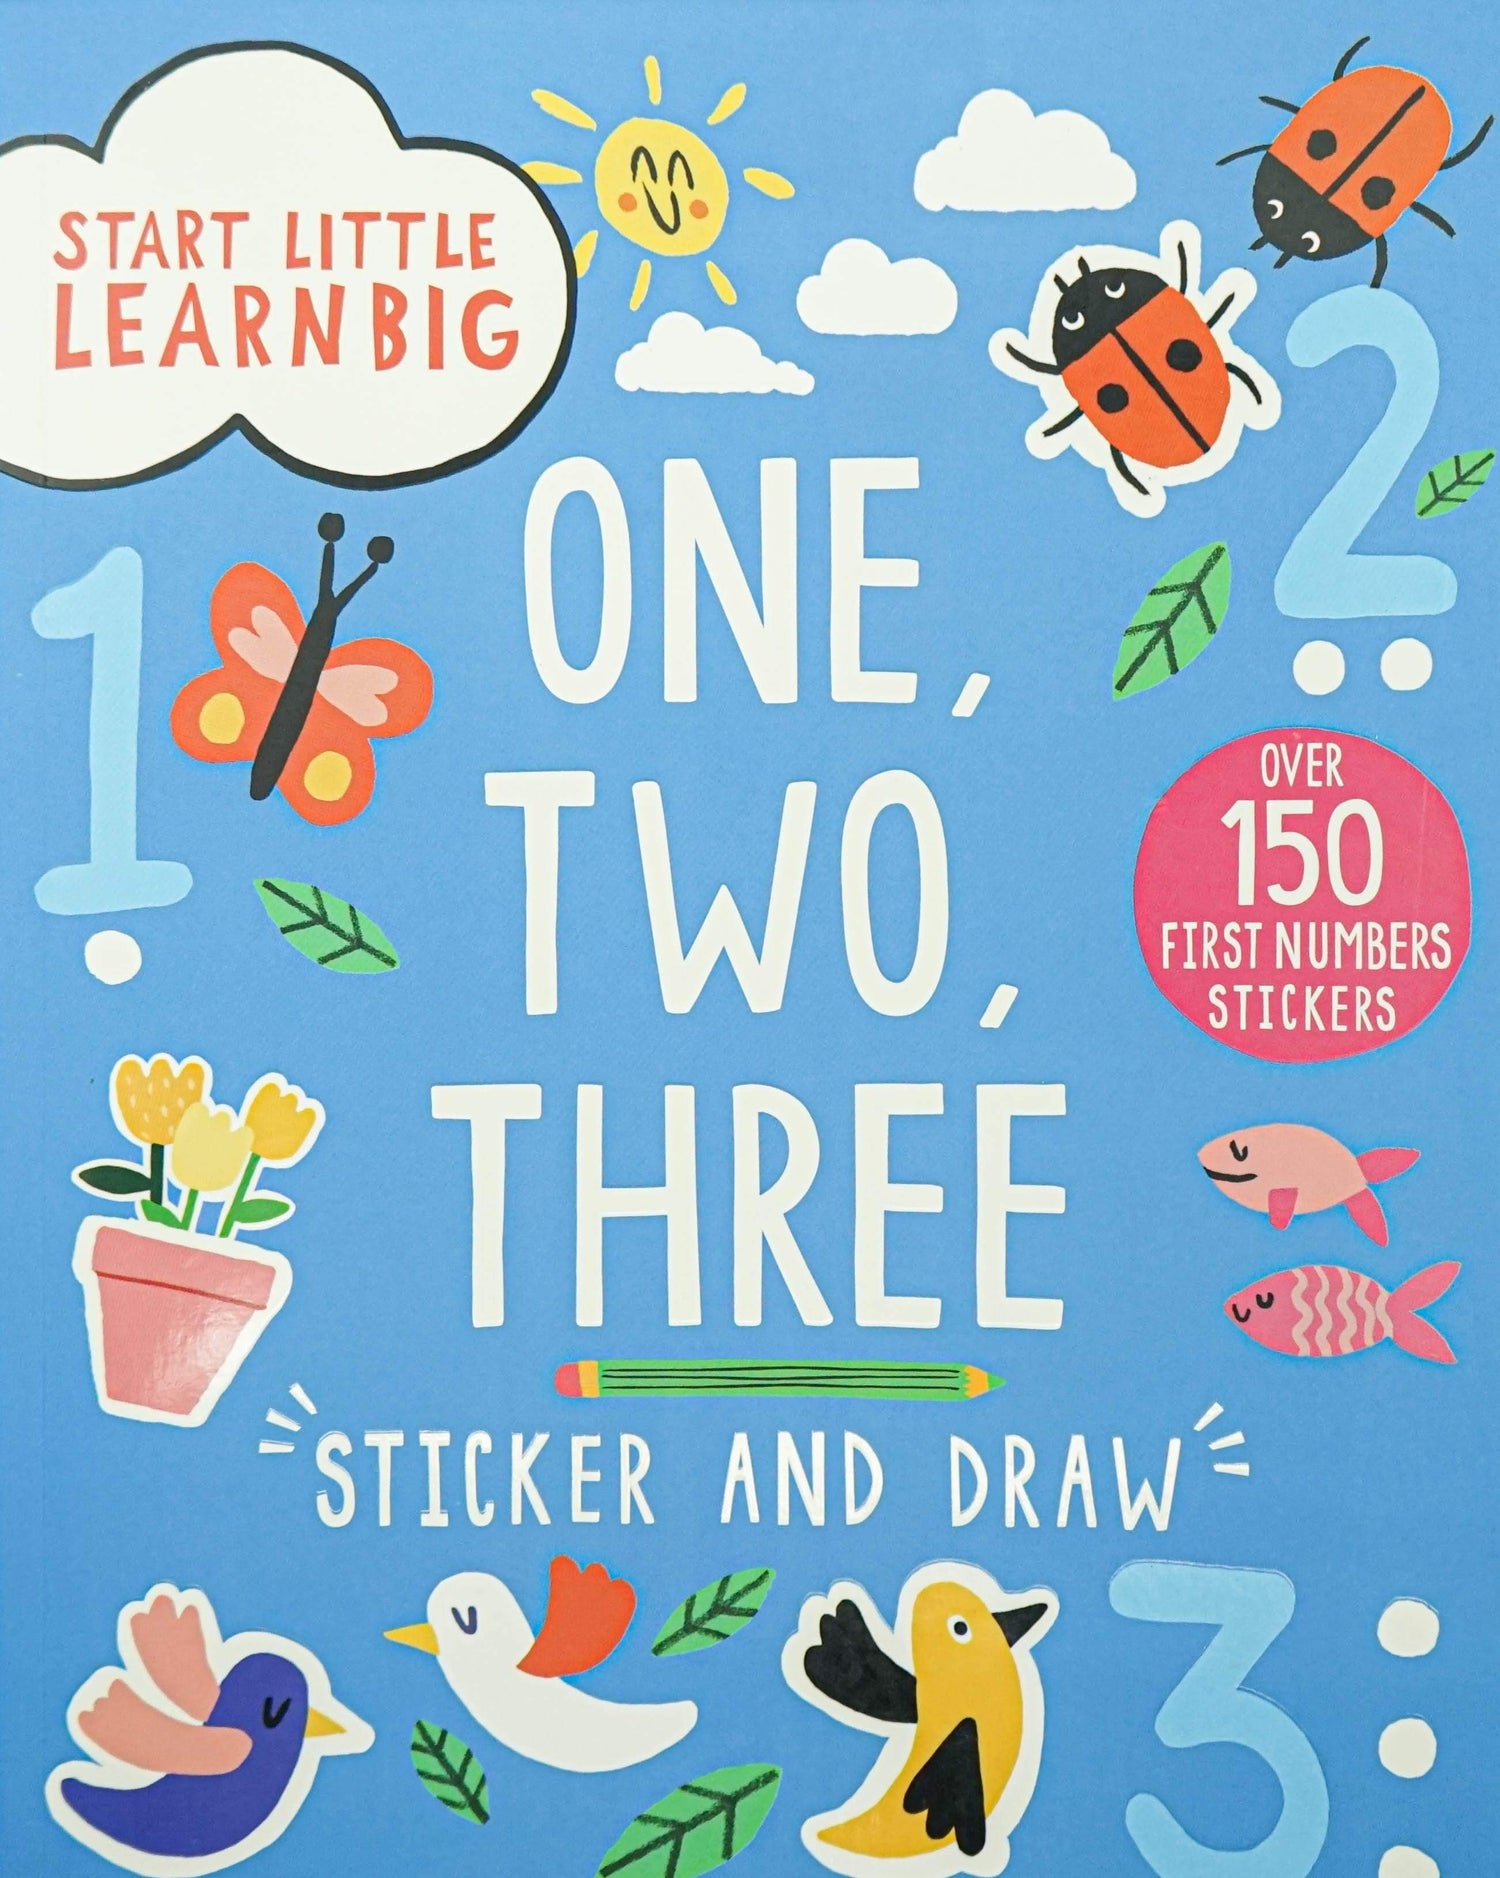 Start Little Learn Big One, Two, Three Sticker And Draw - Over 150 First Numbers Stickers